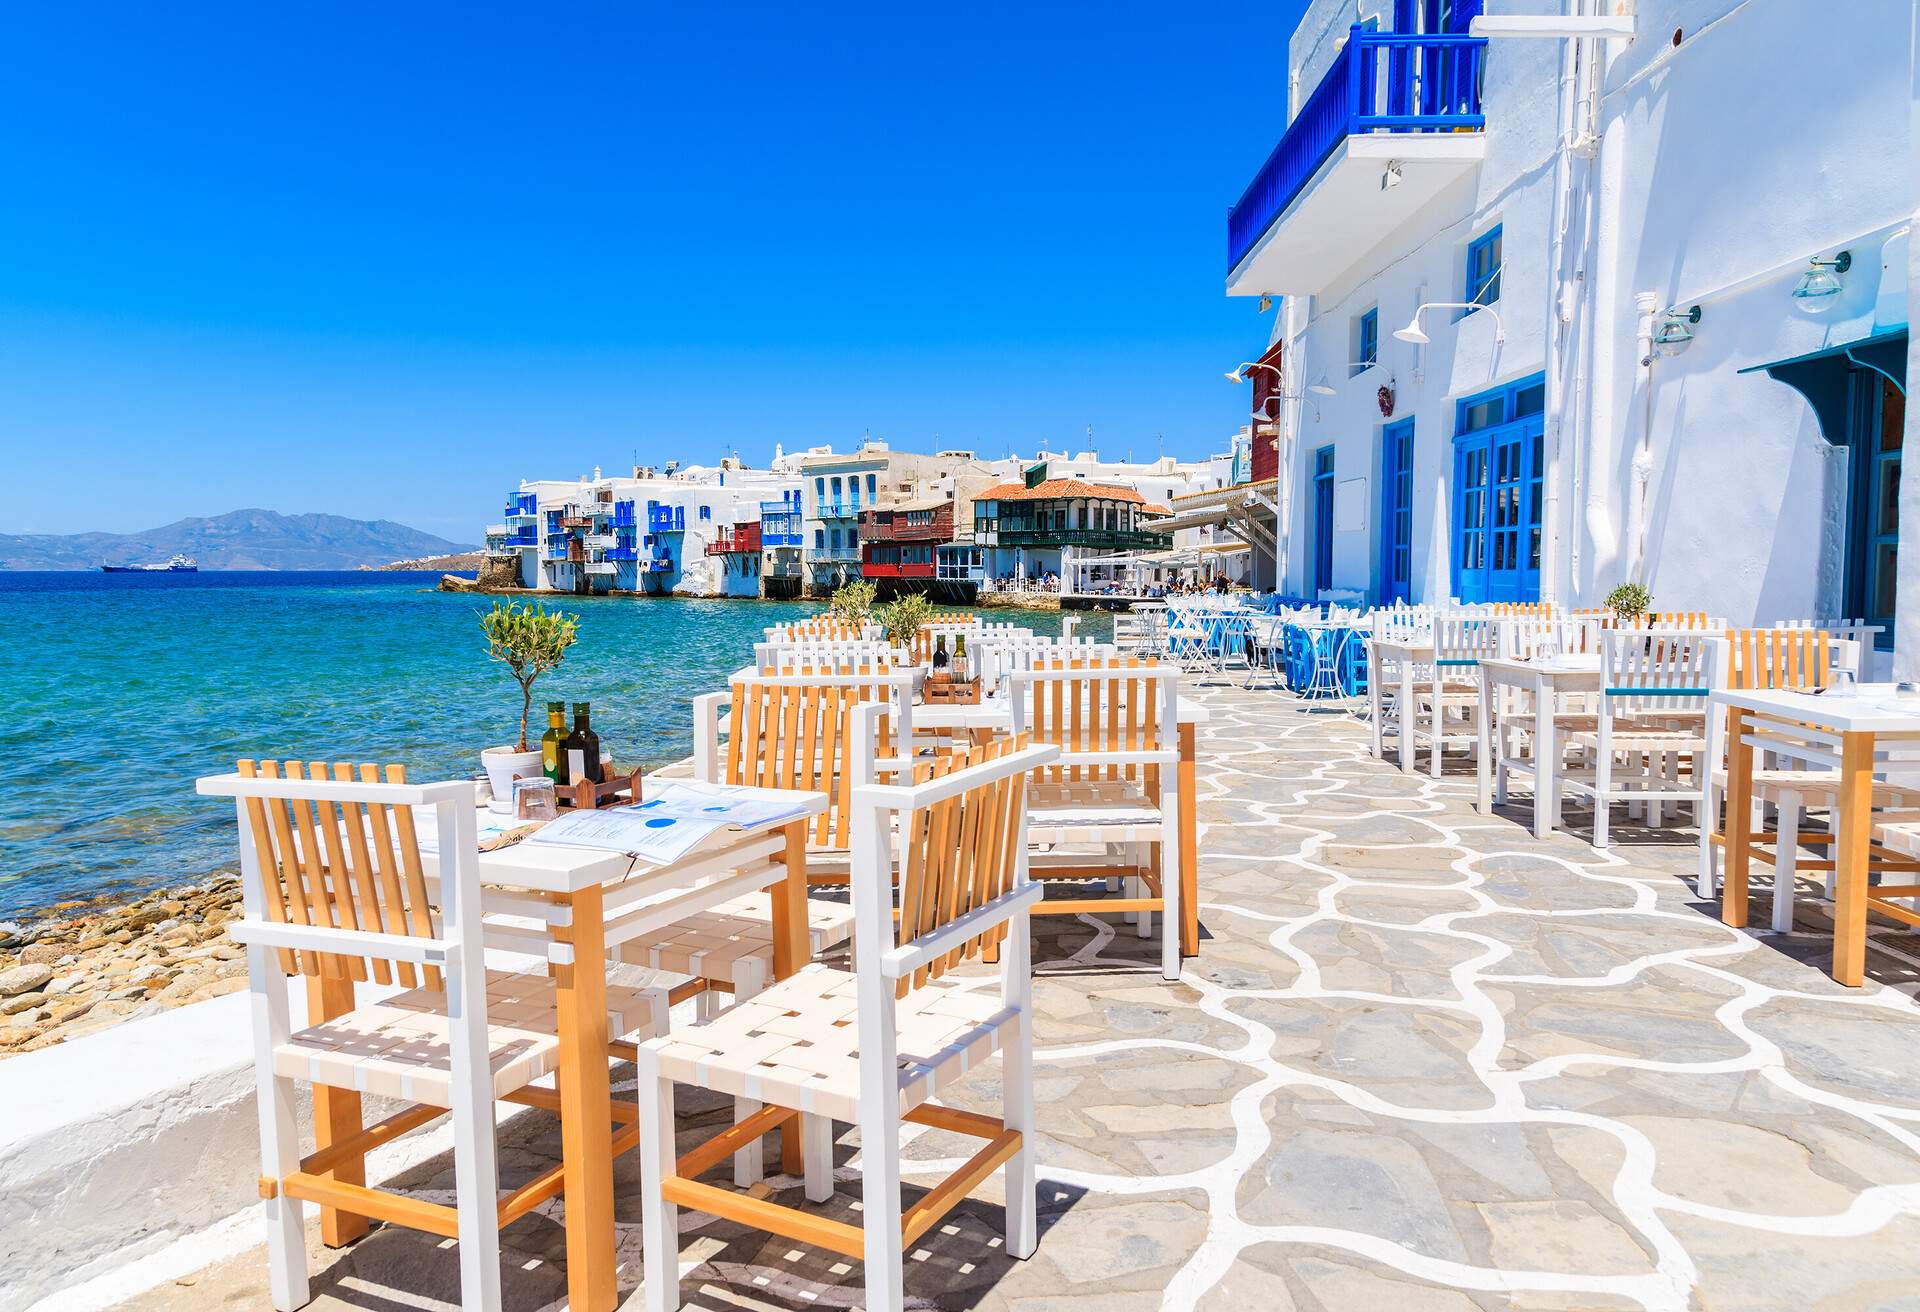 Mykonos is Greece's most famous cosmopolitan island, a whitewashed paradise in the heart of the Cyclades